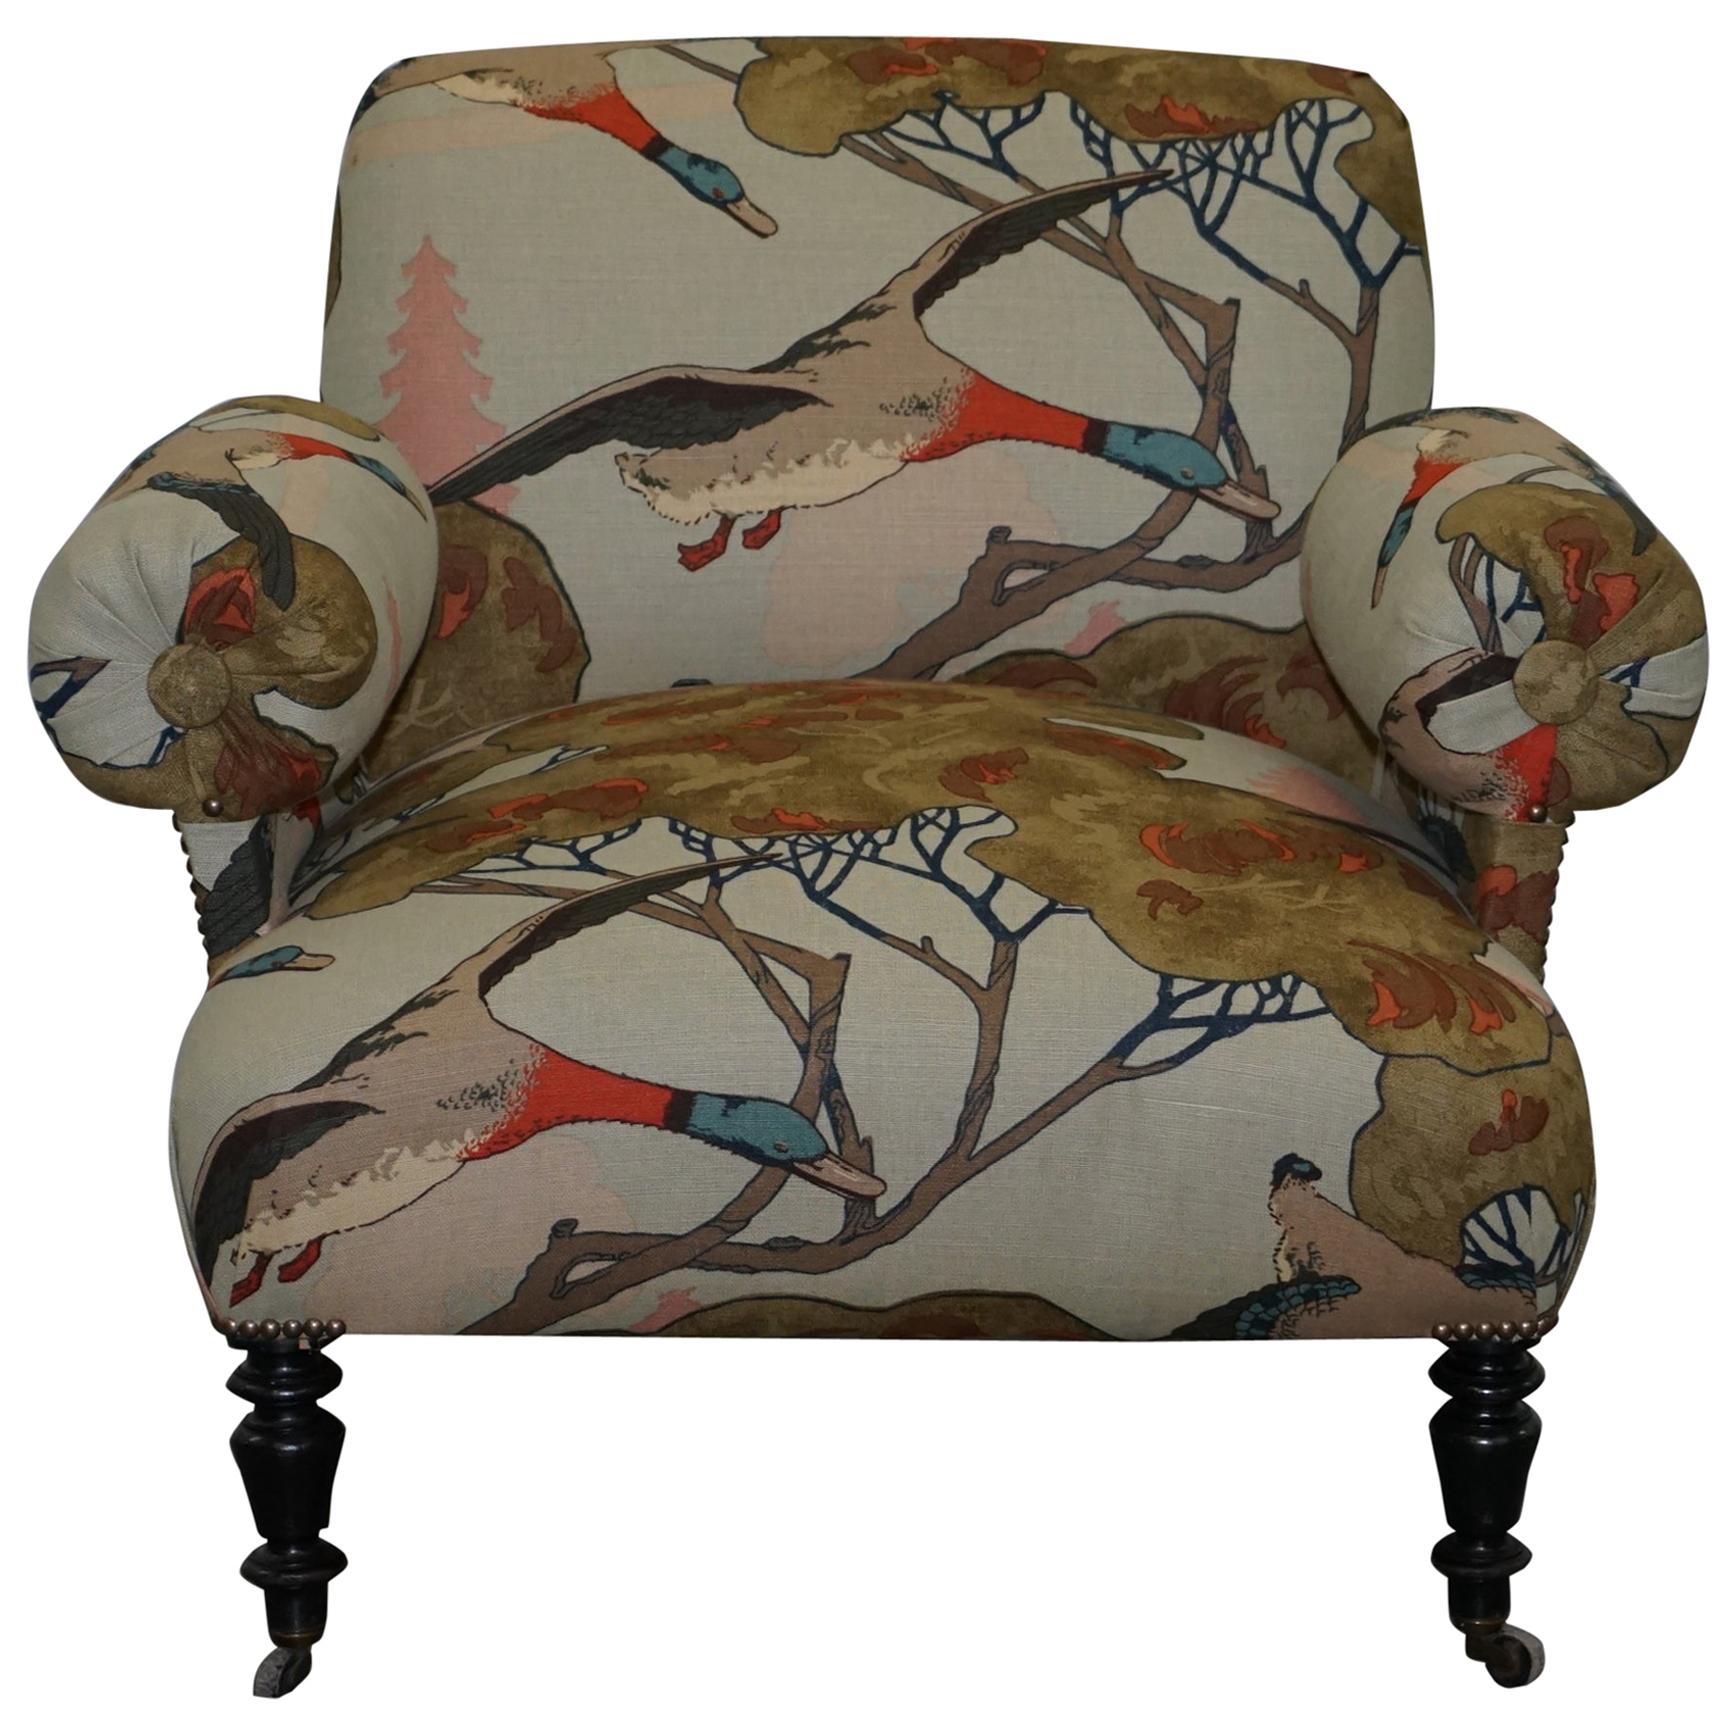 Restored circa 1810 Regency Bluster Arm Armchair Mulberry Flying Duck Fabric